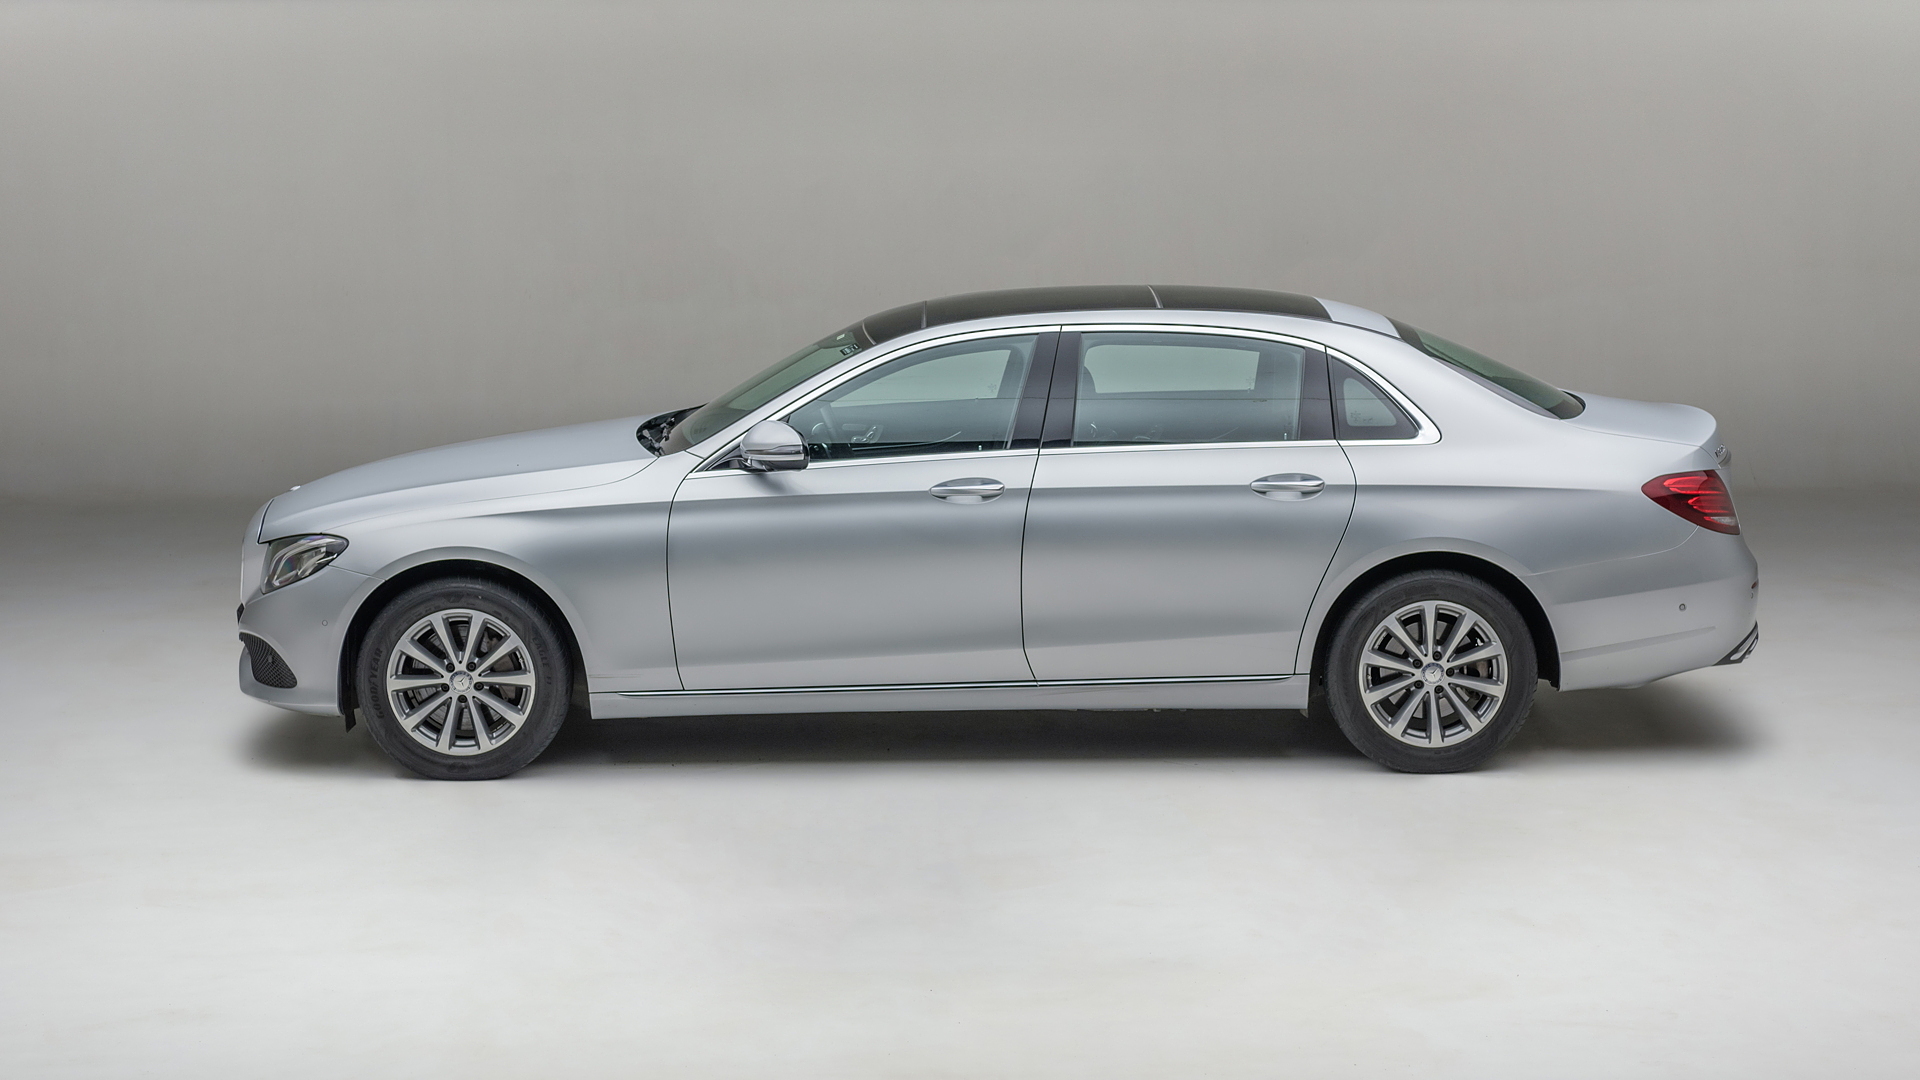 Mercedes Benz E Class 17 21 E 350d Elite Price In India Features Specs And Reviews Carwale